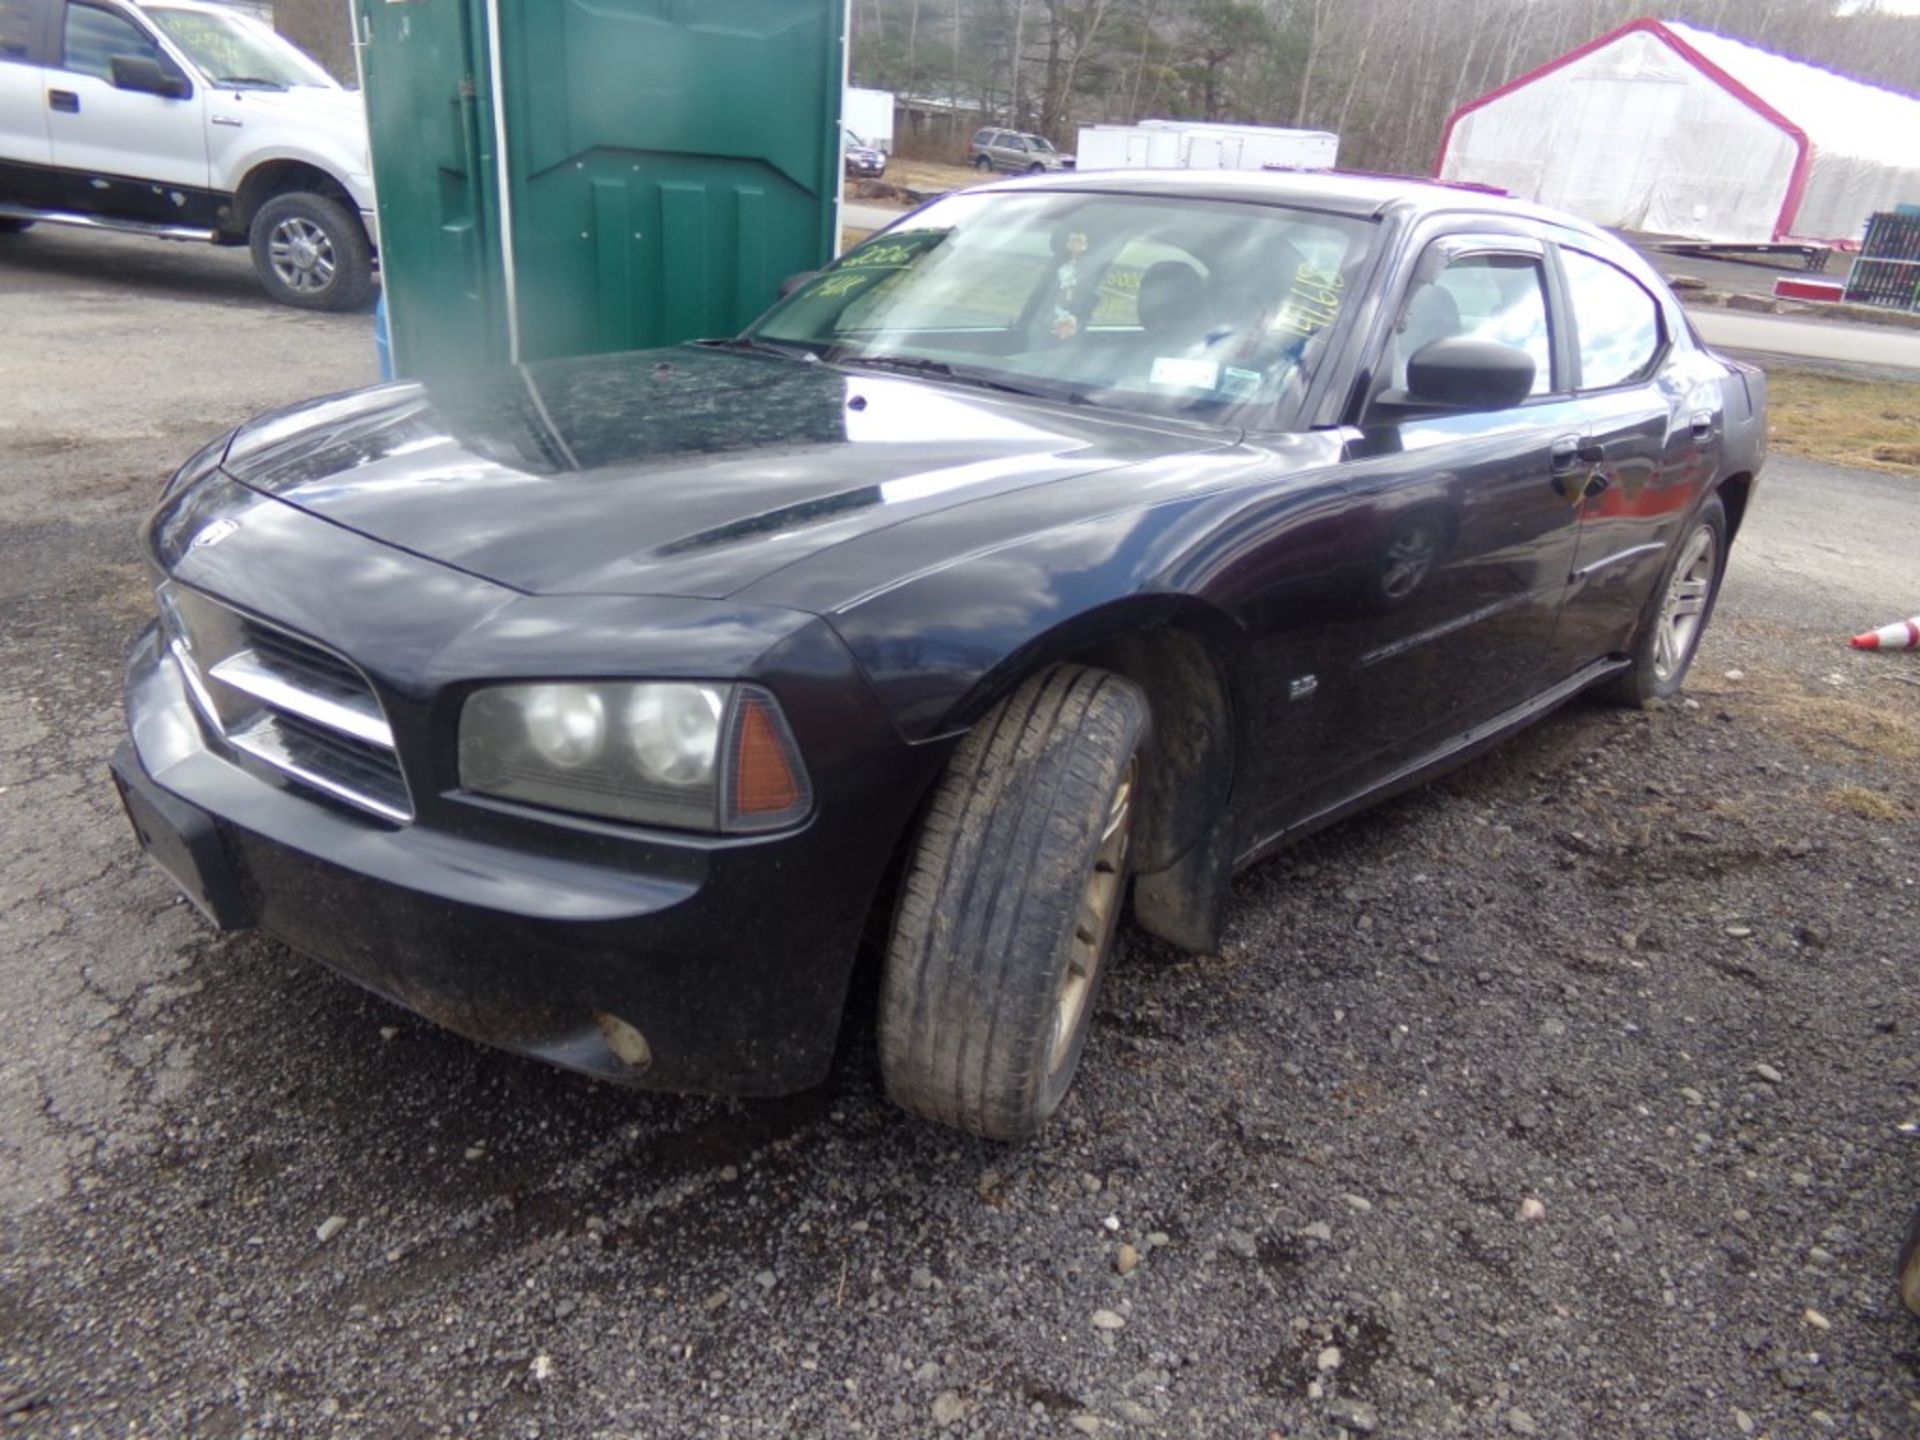 2006 Dodge Charger Base, Black, Sunroof, 141,618 Miles,VIN#: 2B3K43G86H499464 - OPEN TO ALL